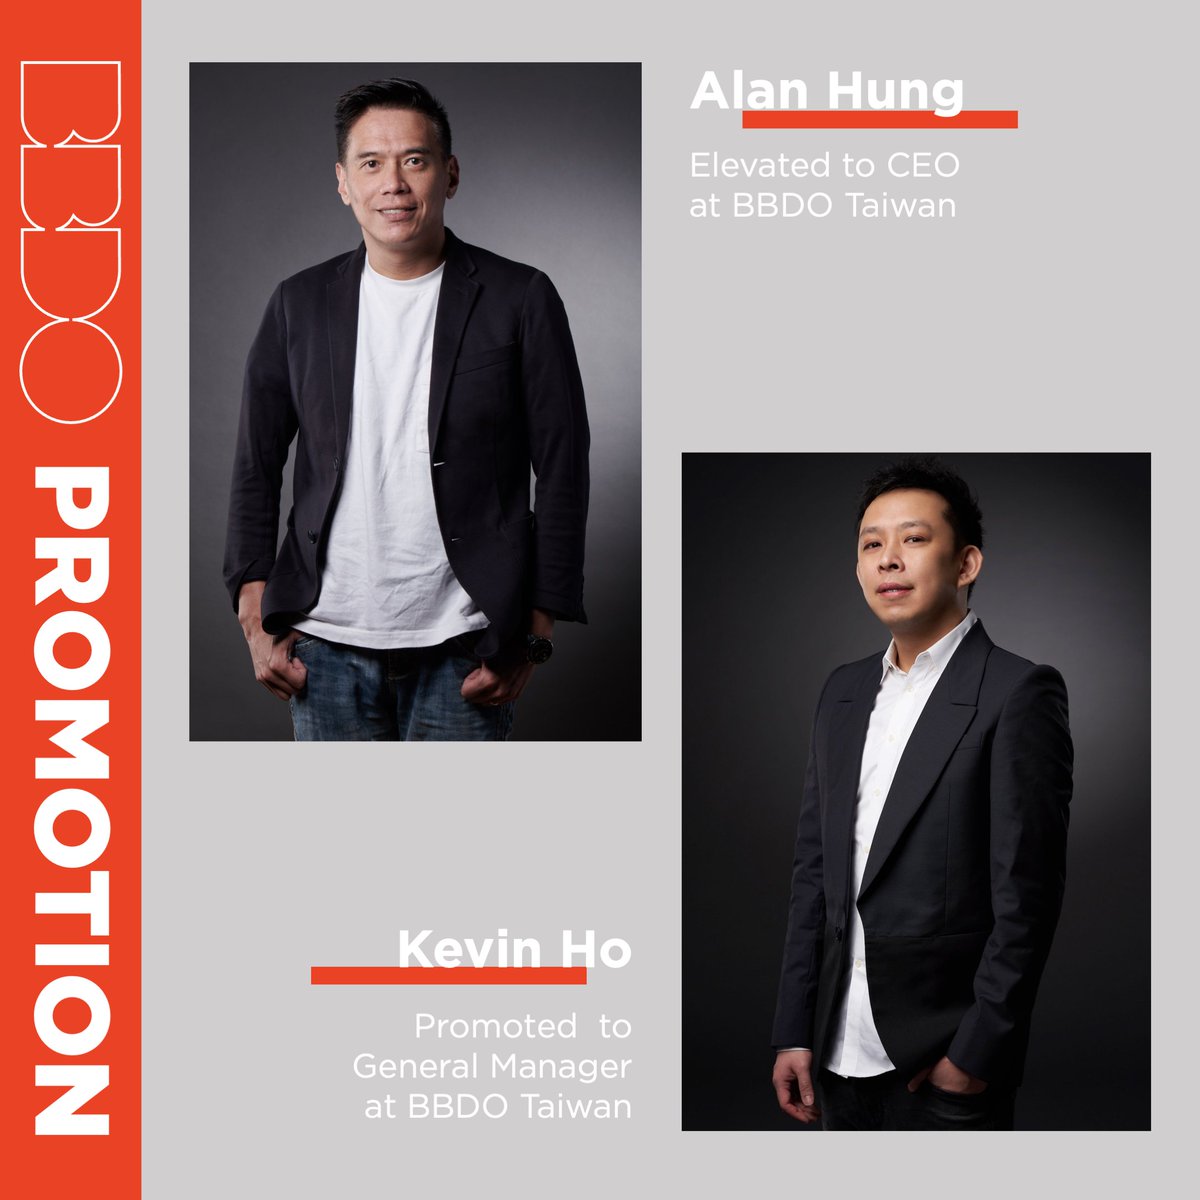 It's delighted to share the exciting news of 2 well-deserved promotions within BBDO Greater China leadership team. Congratulations to Alan and Kevin on these significant milestones in their careers.👏👏👏